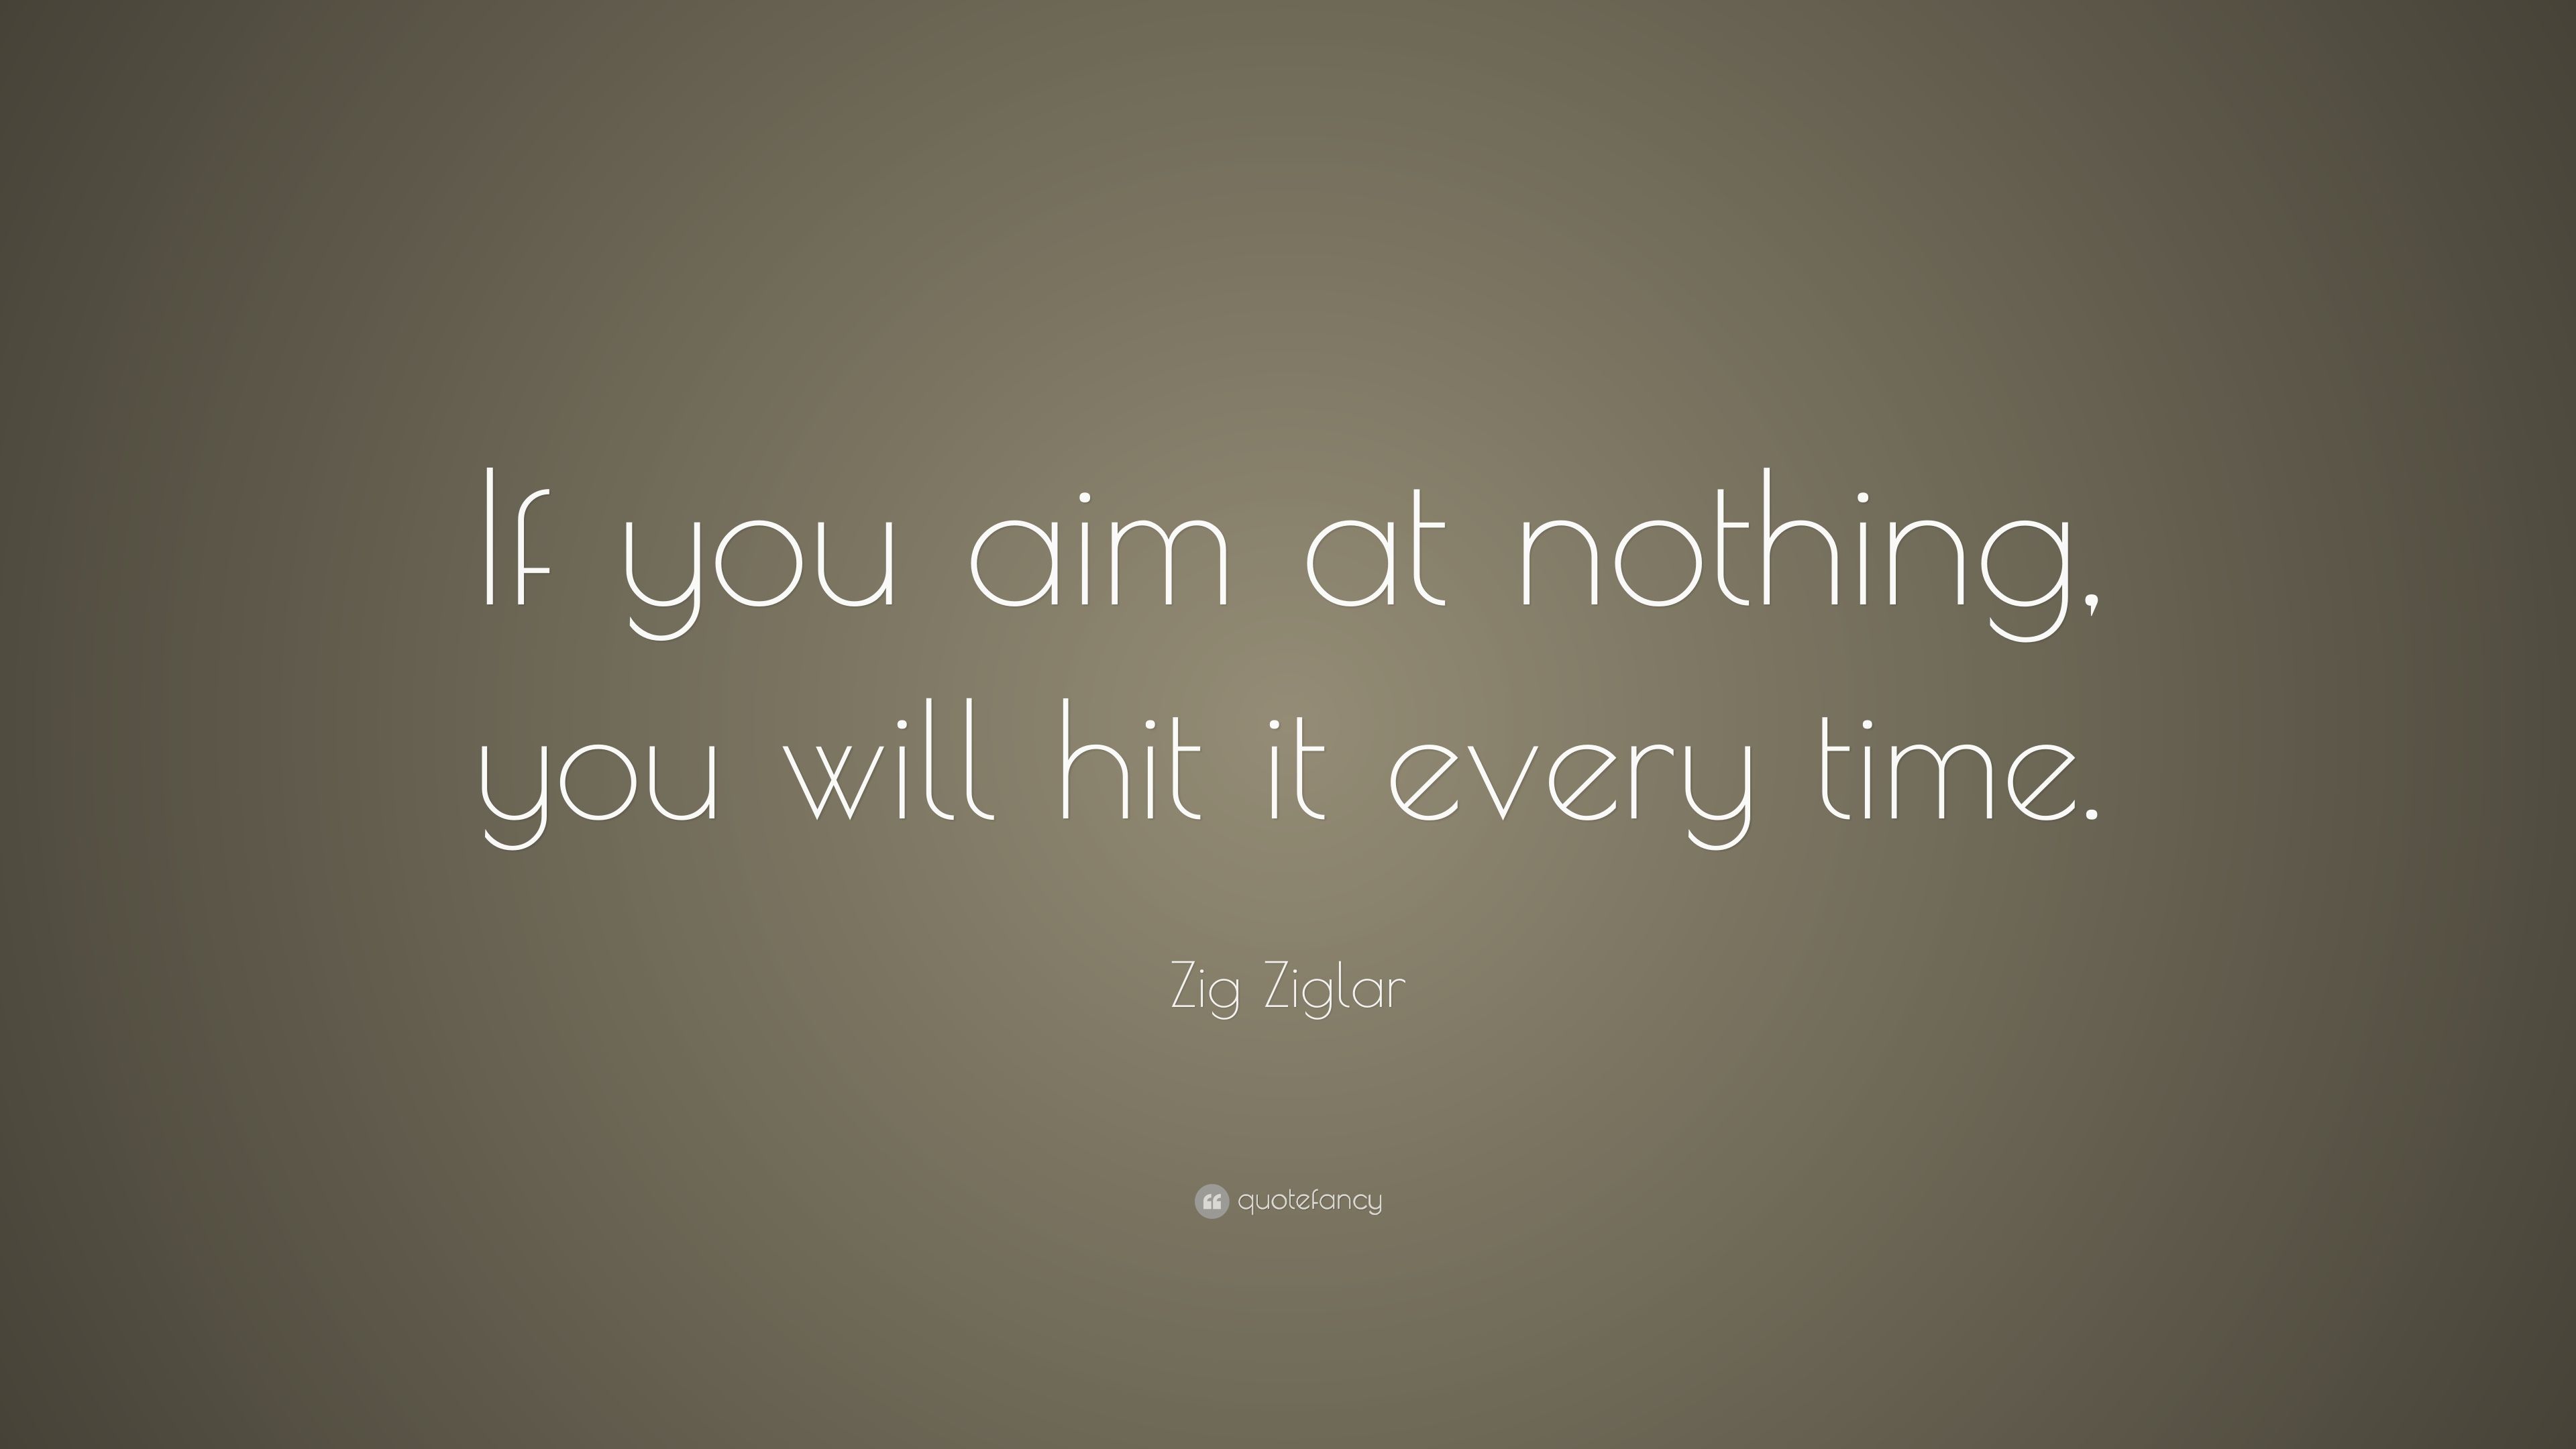 Zig Ziglar Quote If you aim at nothing, you will hit it every